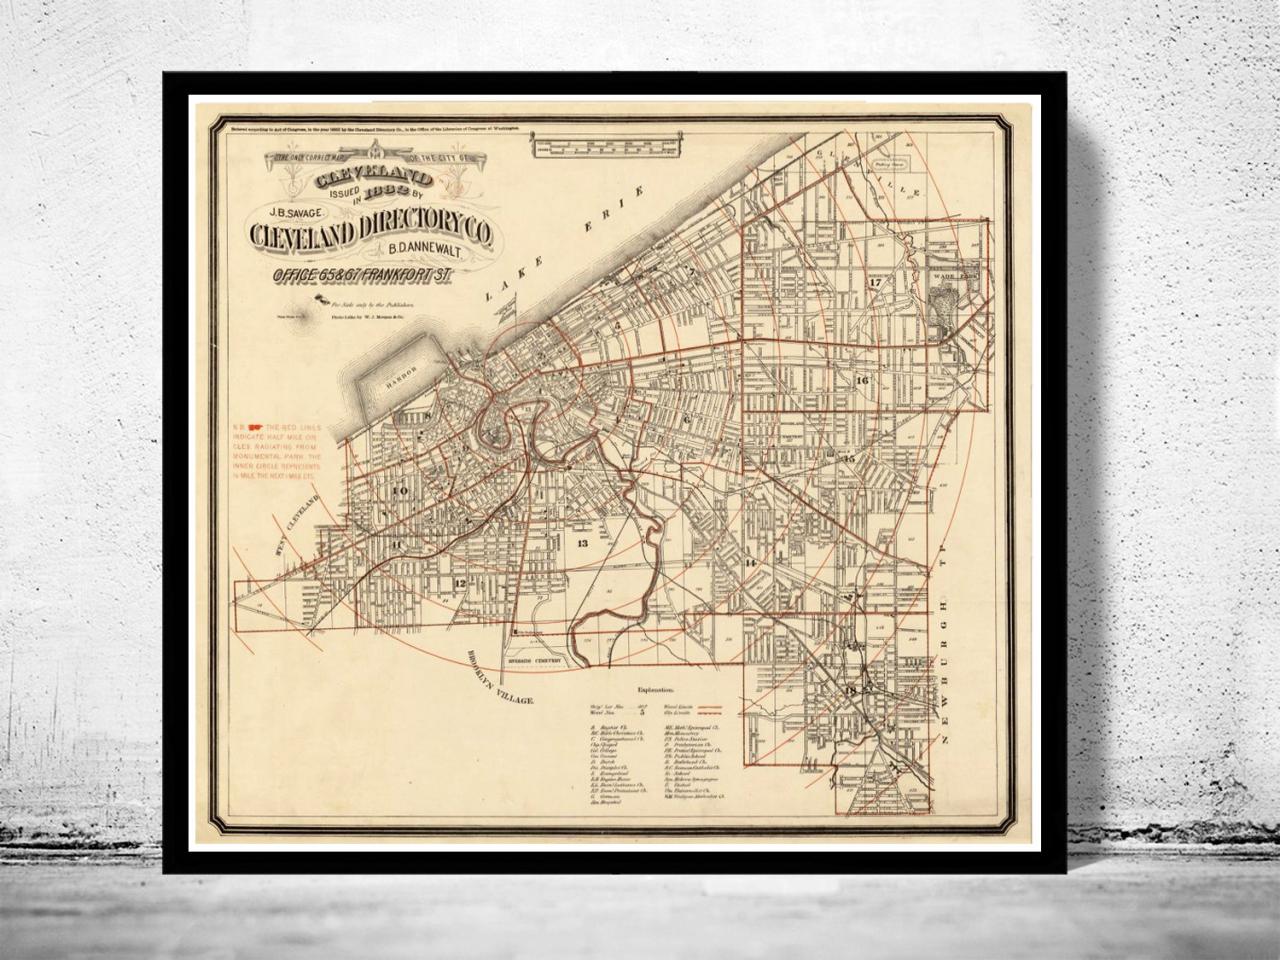 Old Map of Cleveland and suburbs 1882